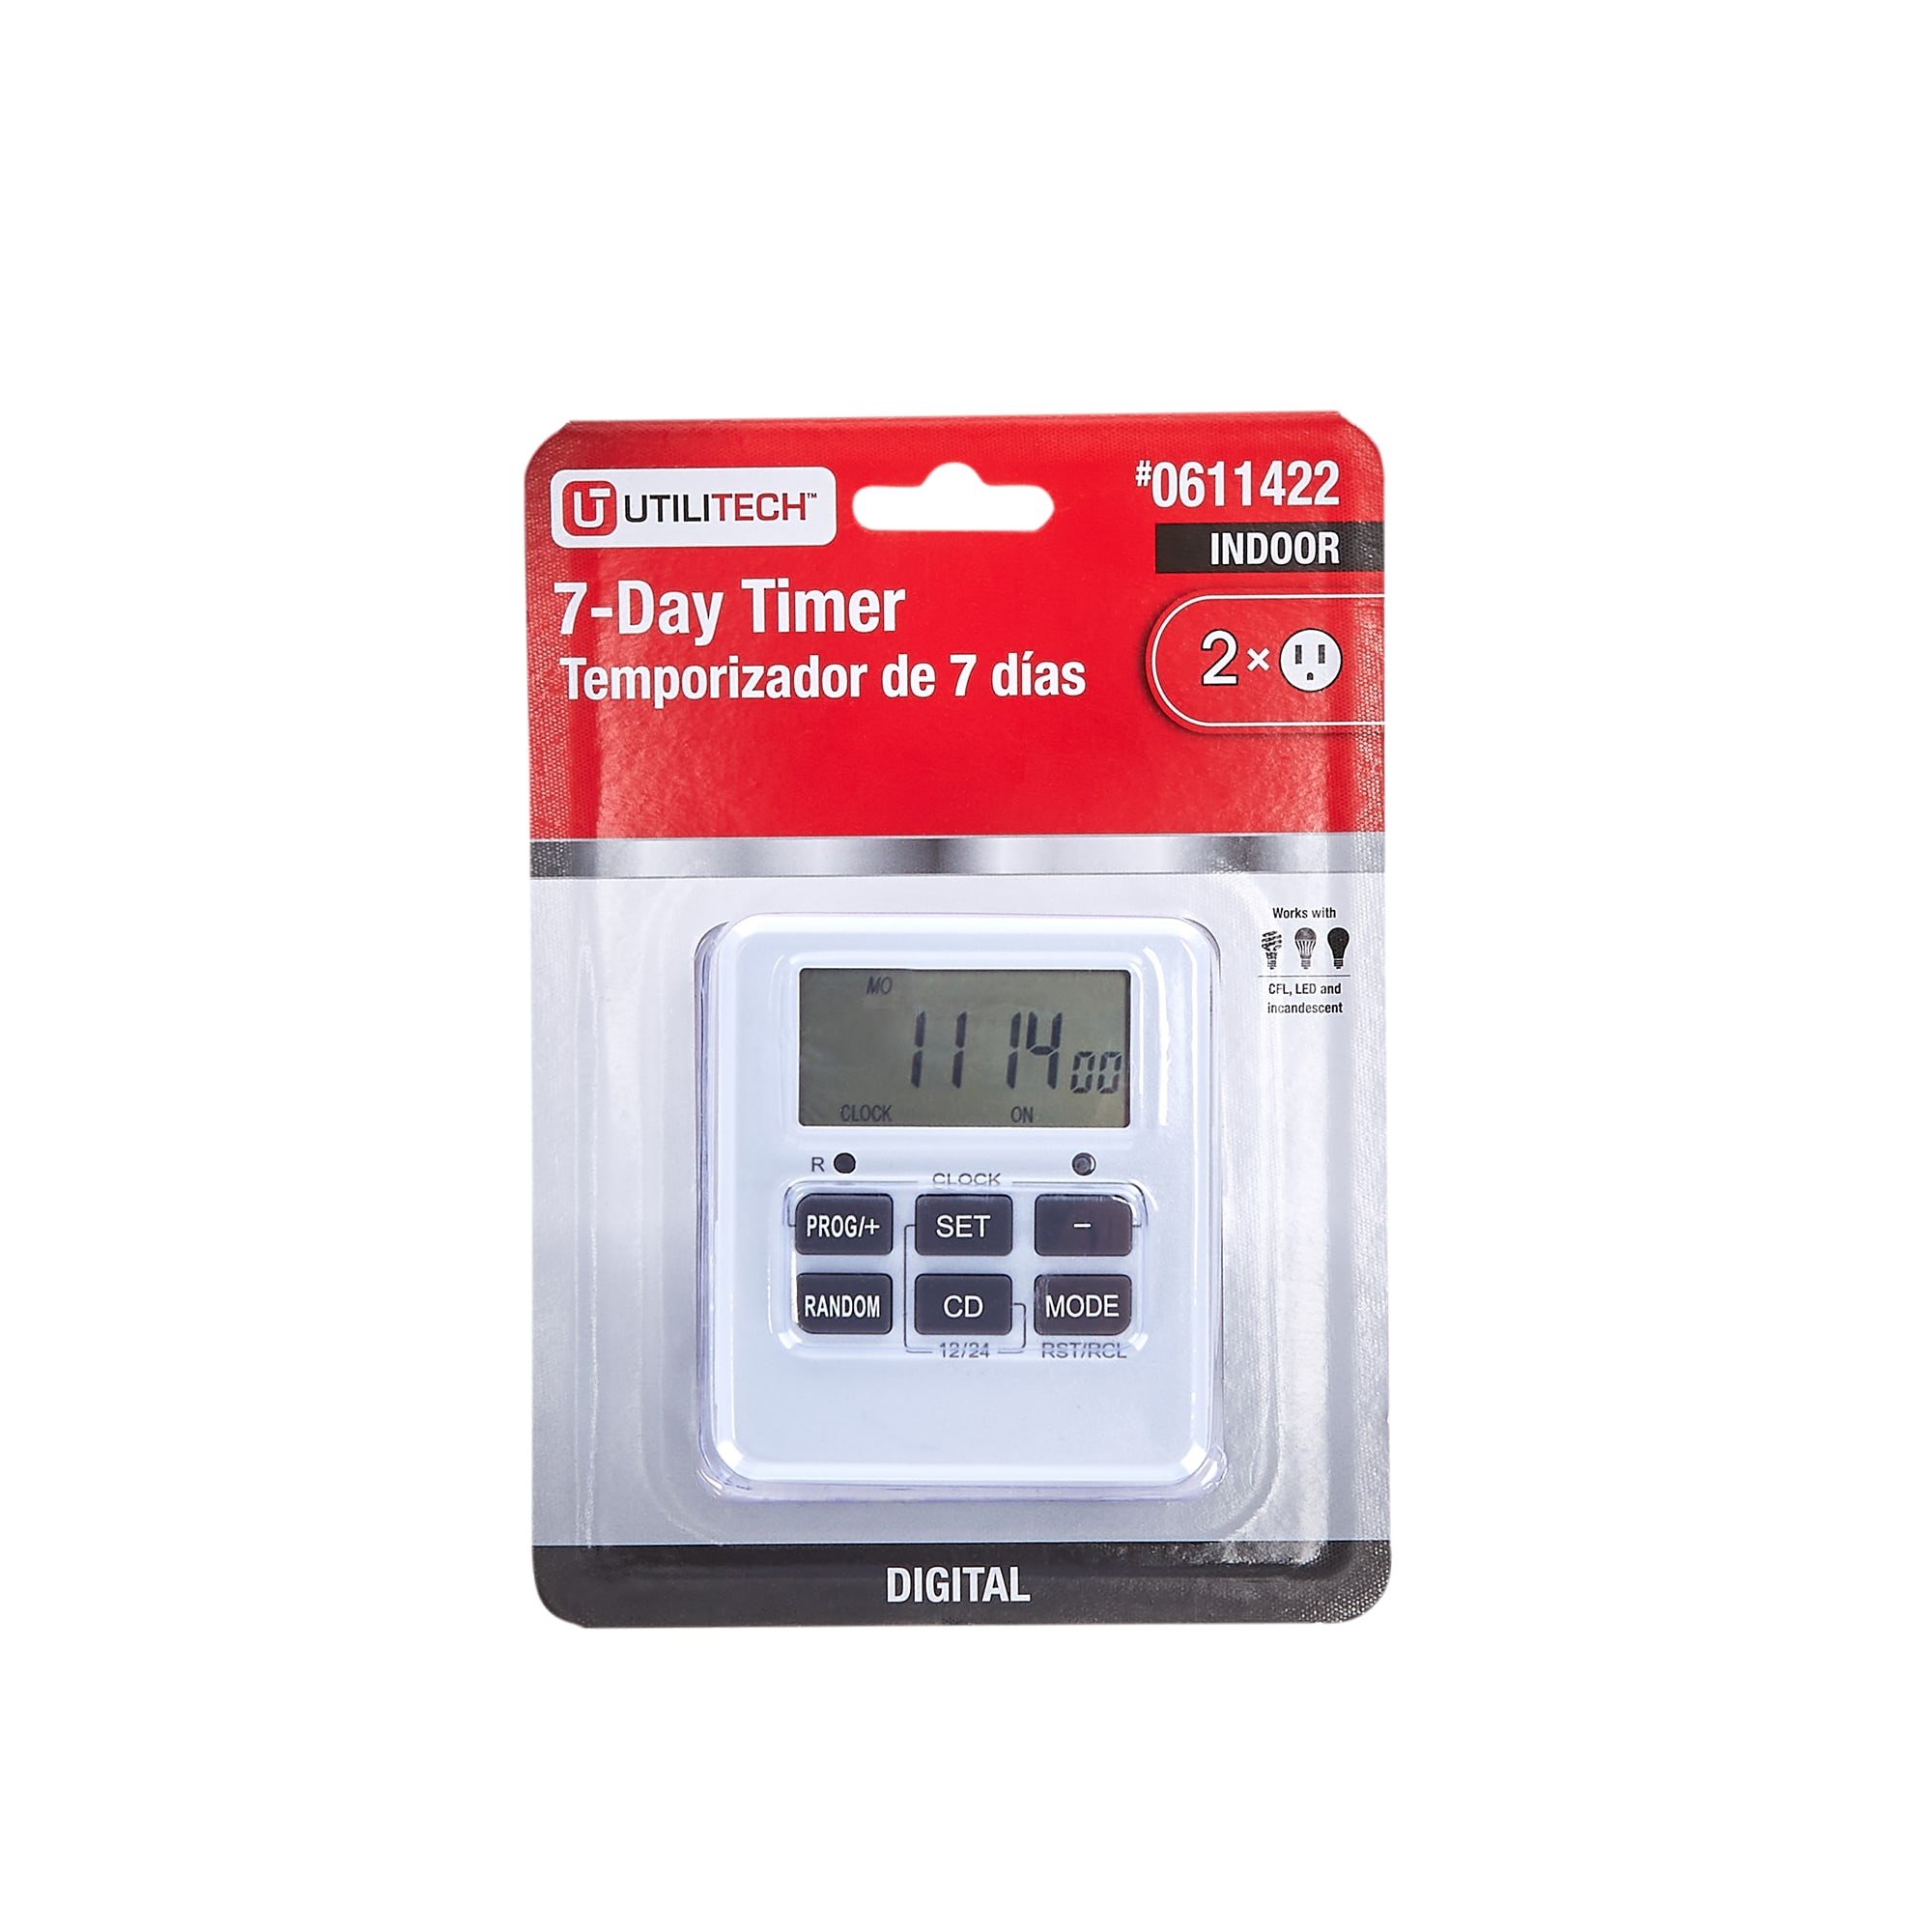 99 days 23 hours timer, stick-on anywhrer, TR810DH - VOSCA Corporation